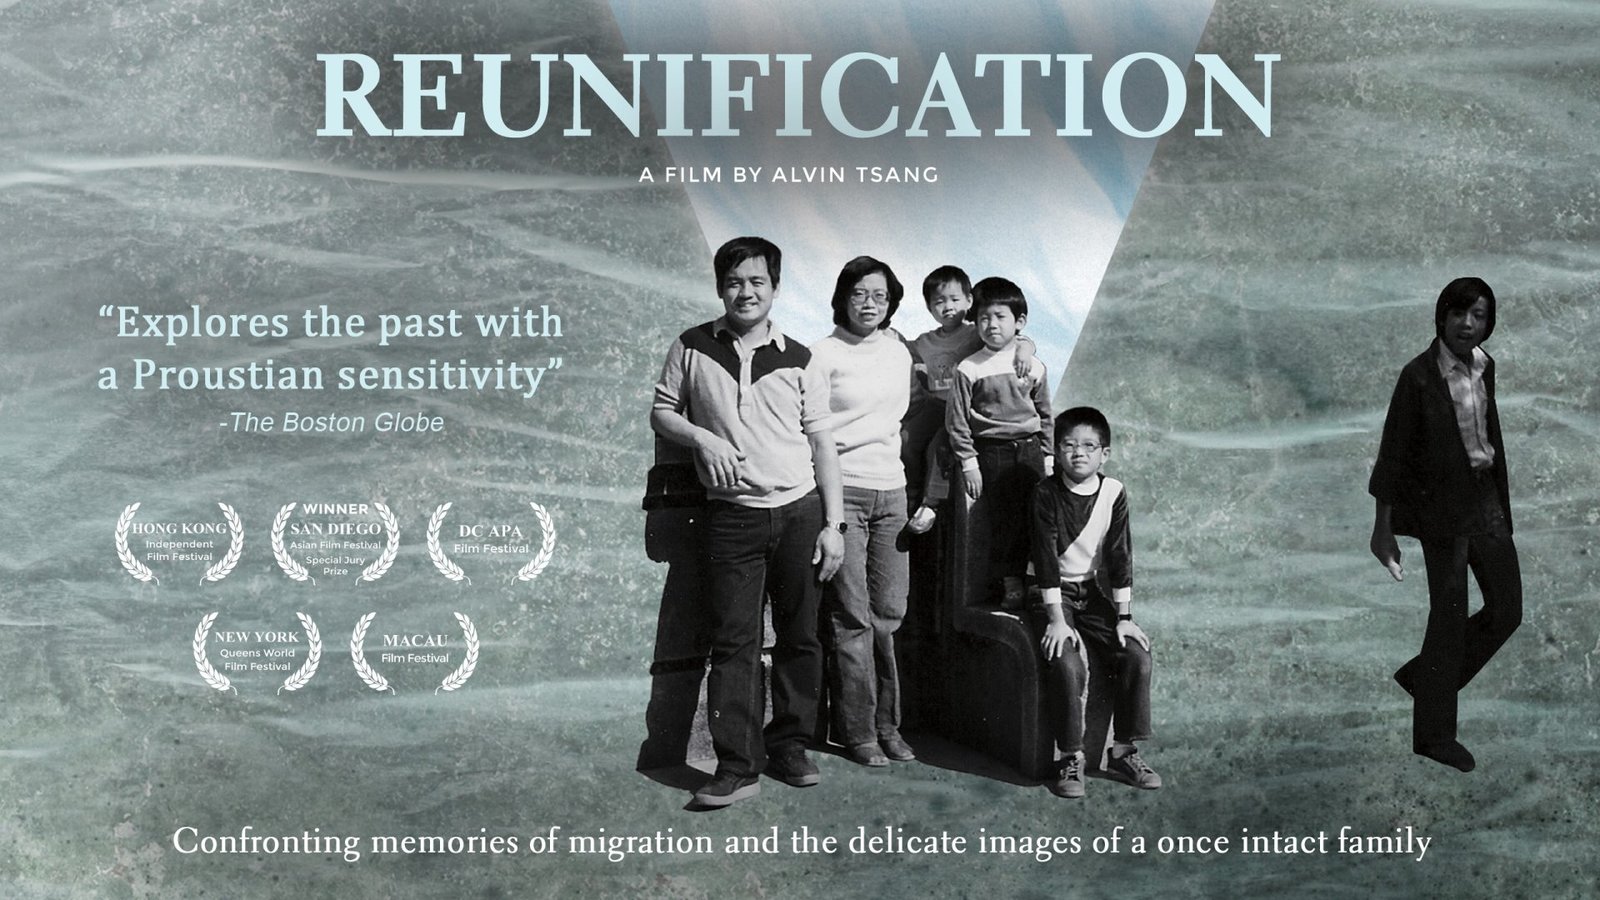 Reunification - Memories of Migration and a Once Intact Family